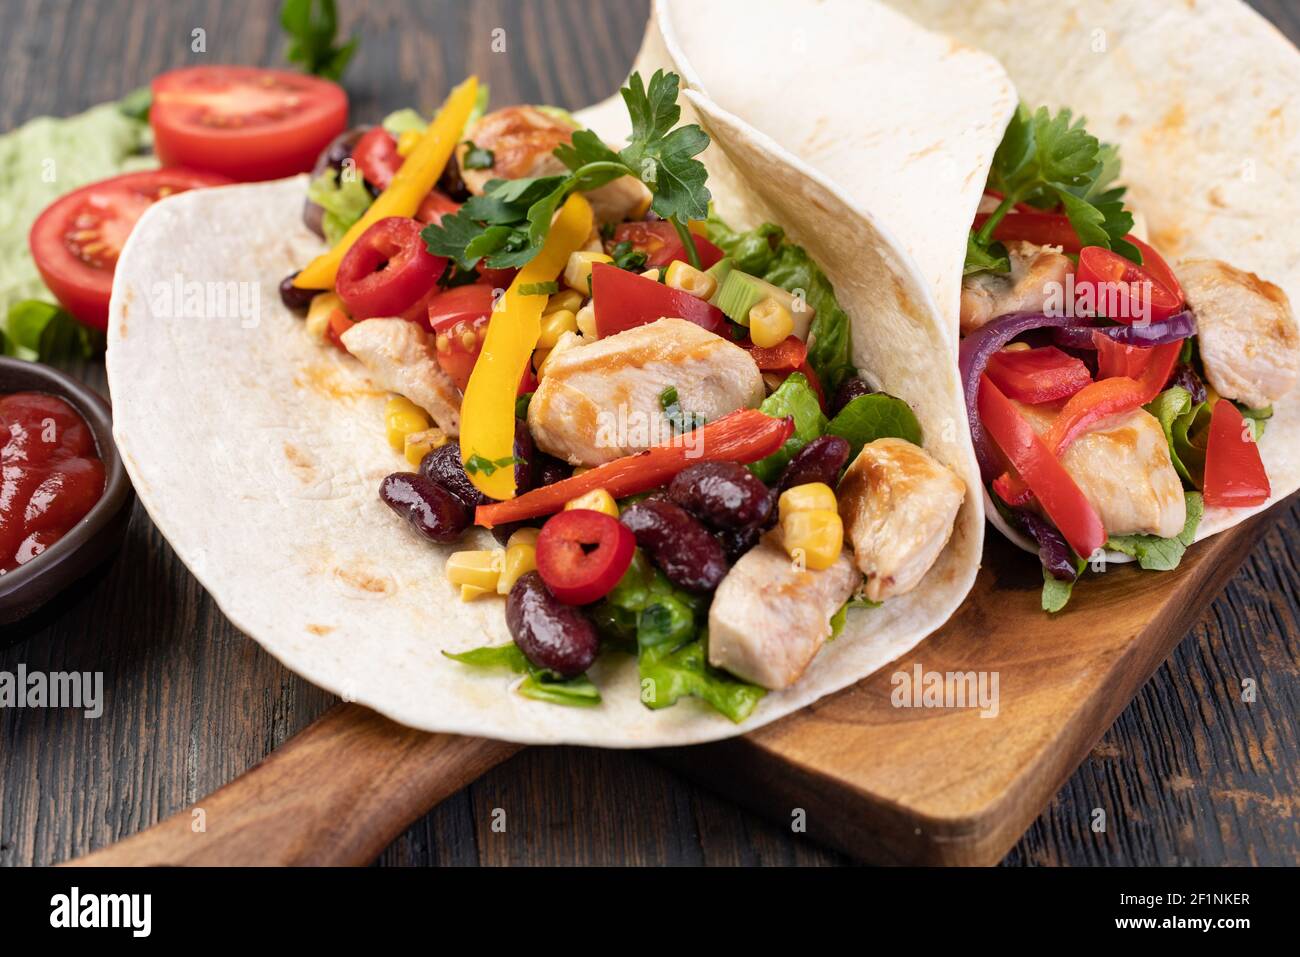 Burrito with vegetables and tortilla Stock Photo